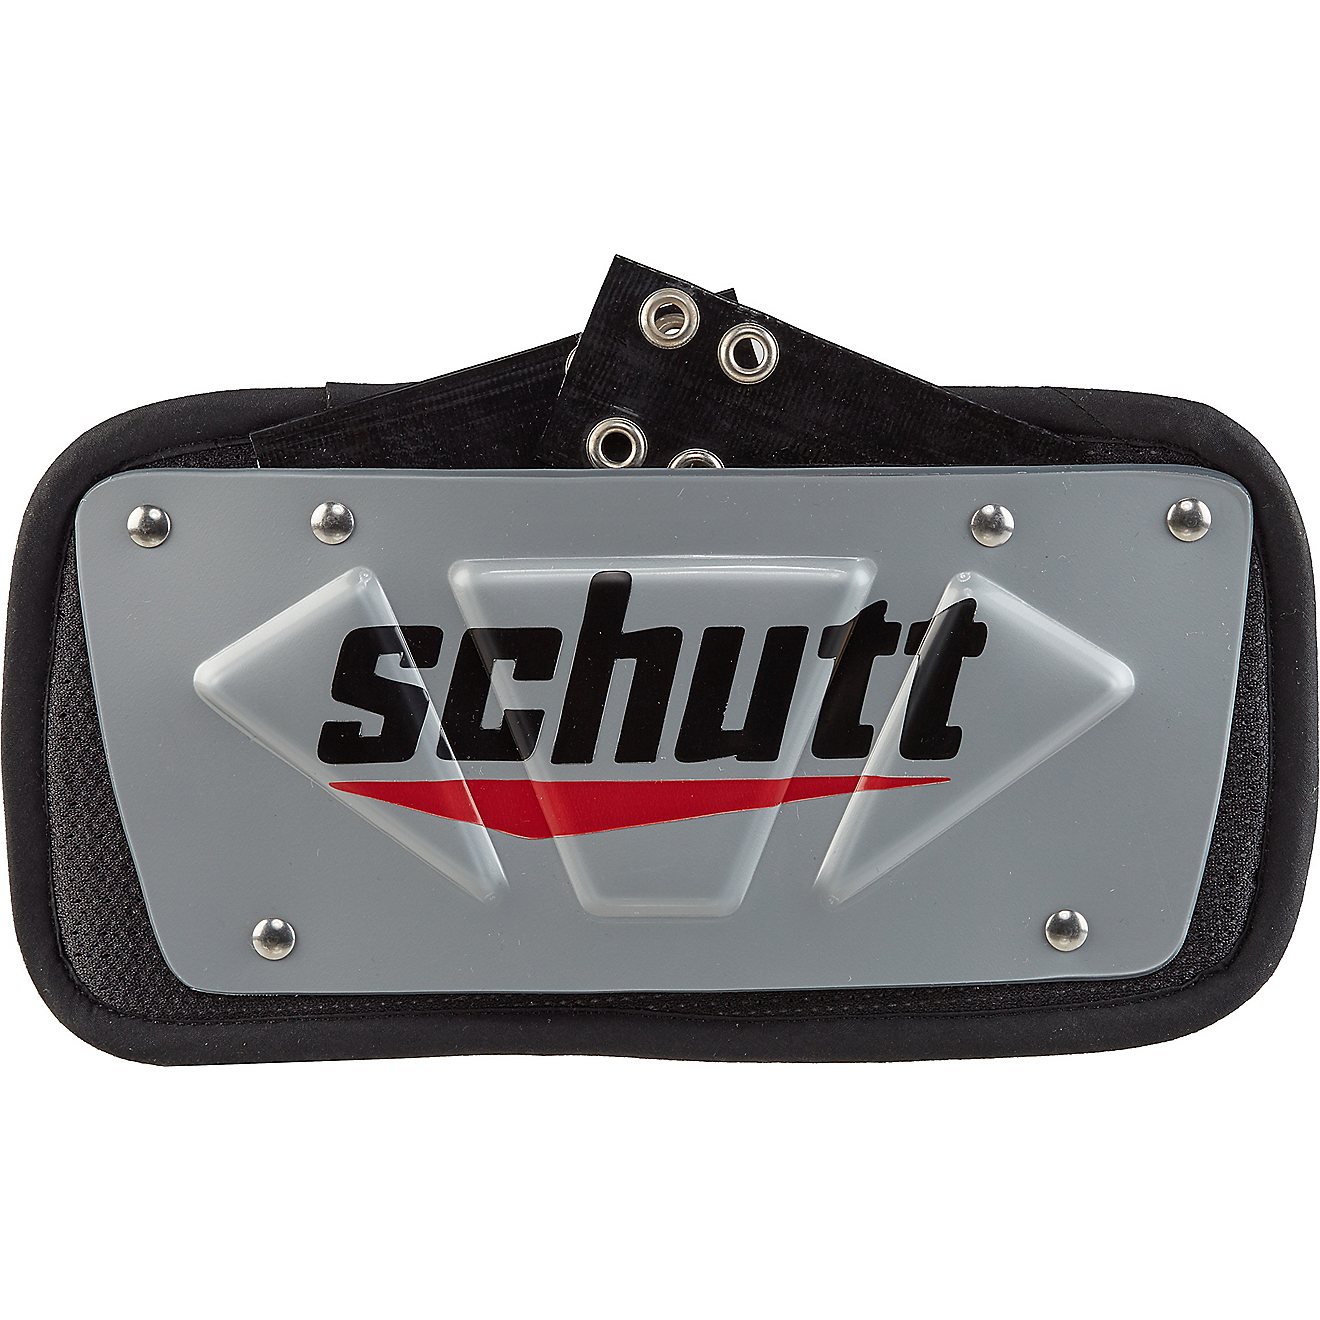 Details about   SCHUTT VENTILATED VARSITY BACK PLATE #7992300 FREE SHIPPING 